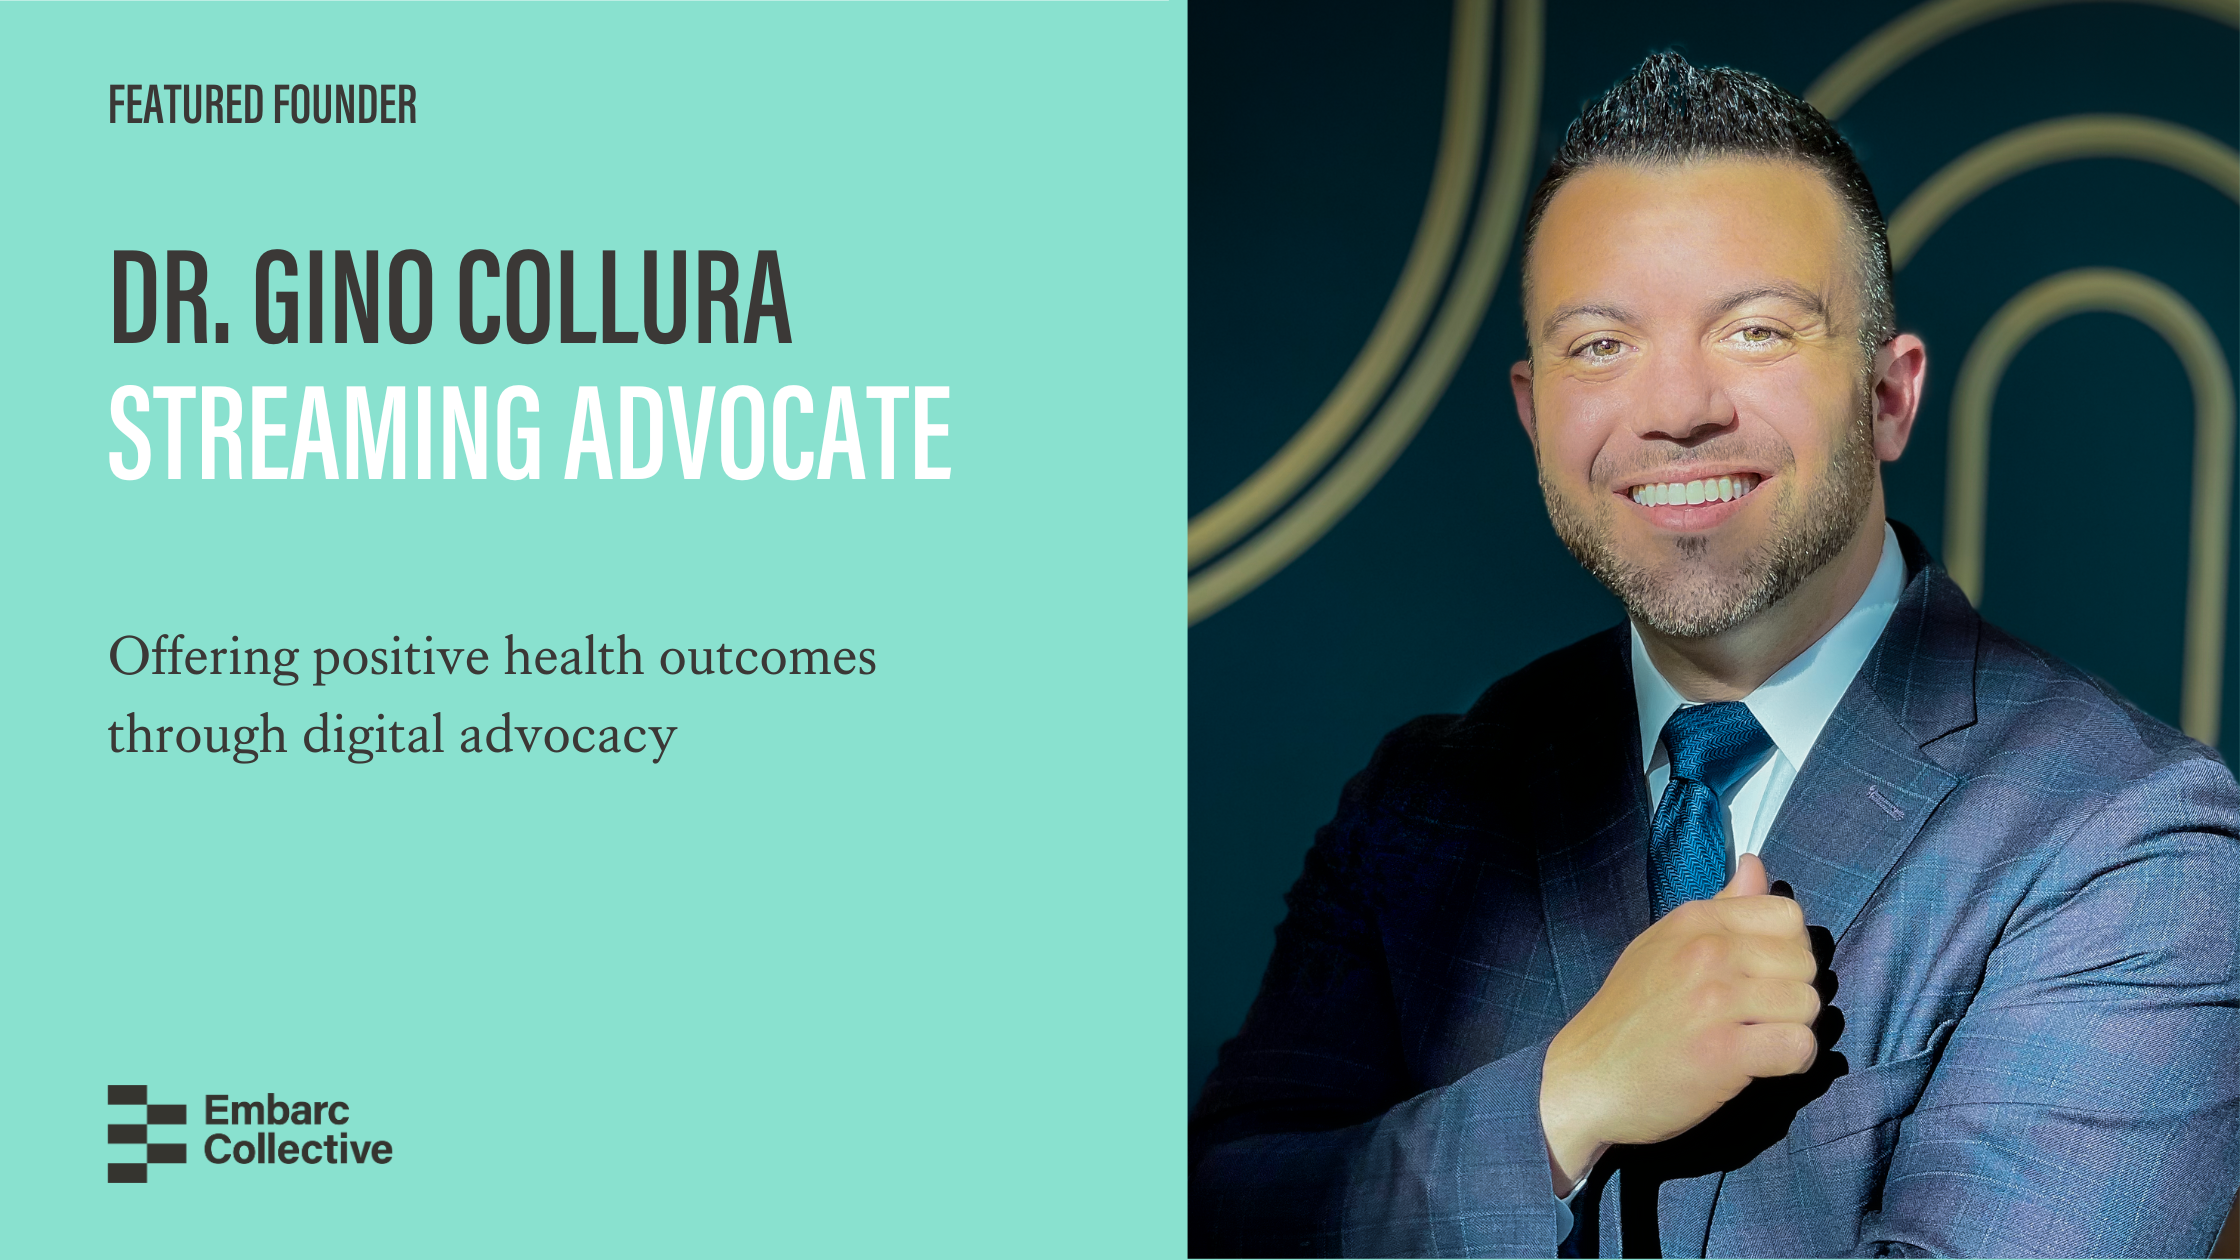 Featured Founder: Dr. Gino Collura of Streaming Advocate